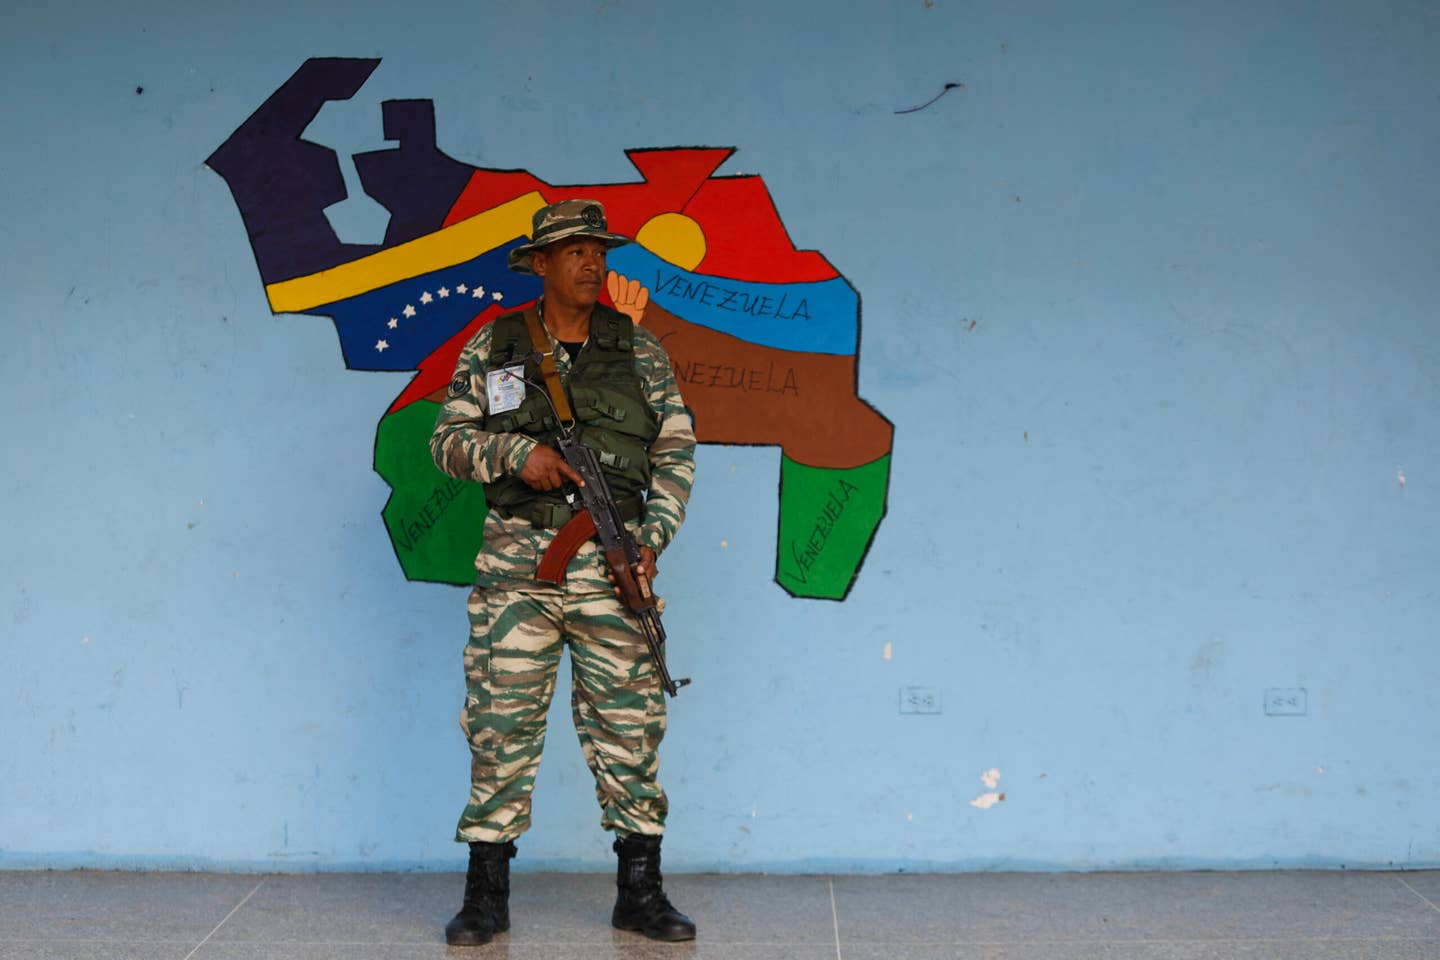 A member of the Bolivarian Militias stands guard at a polling station during a consultative referendum on Venezuelan sovereignty over the Essequibo region controlled by neighboring Guyana, in Caracas on December 3, 2023. <em>Photo by PEDRO RANCES MATTEY/AFP via Getty Images</em>